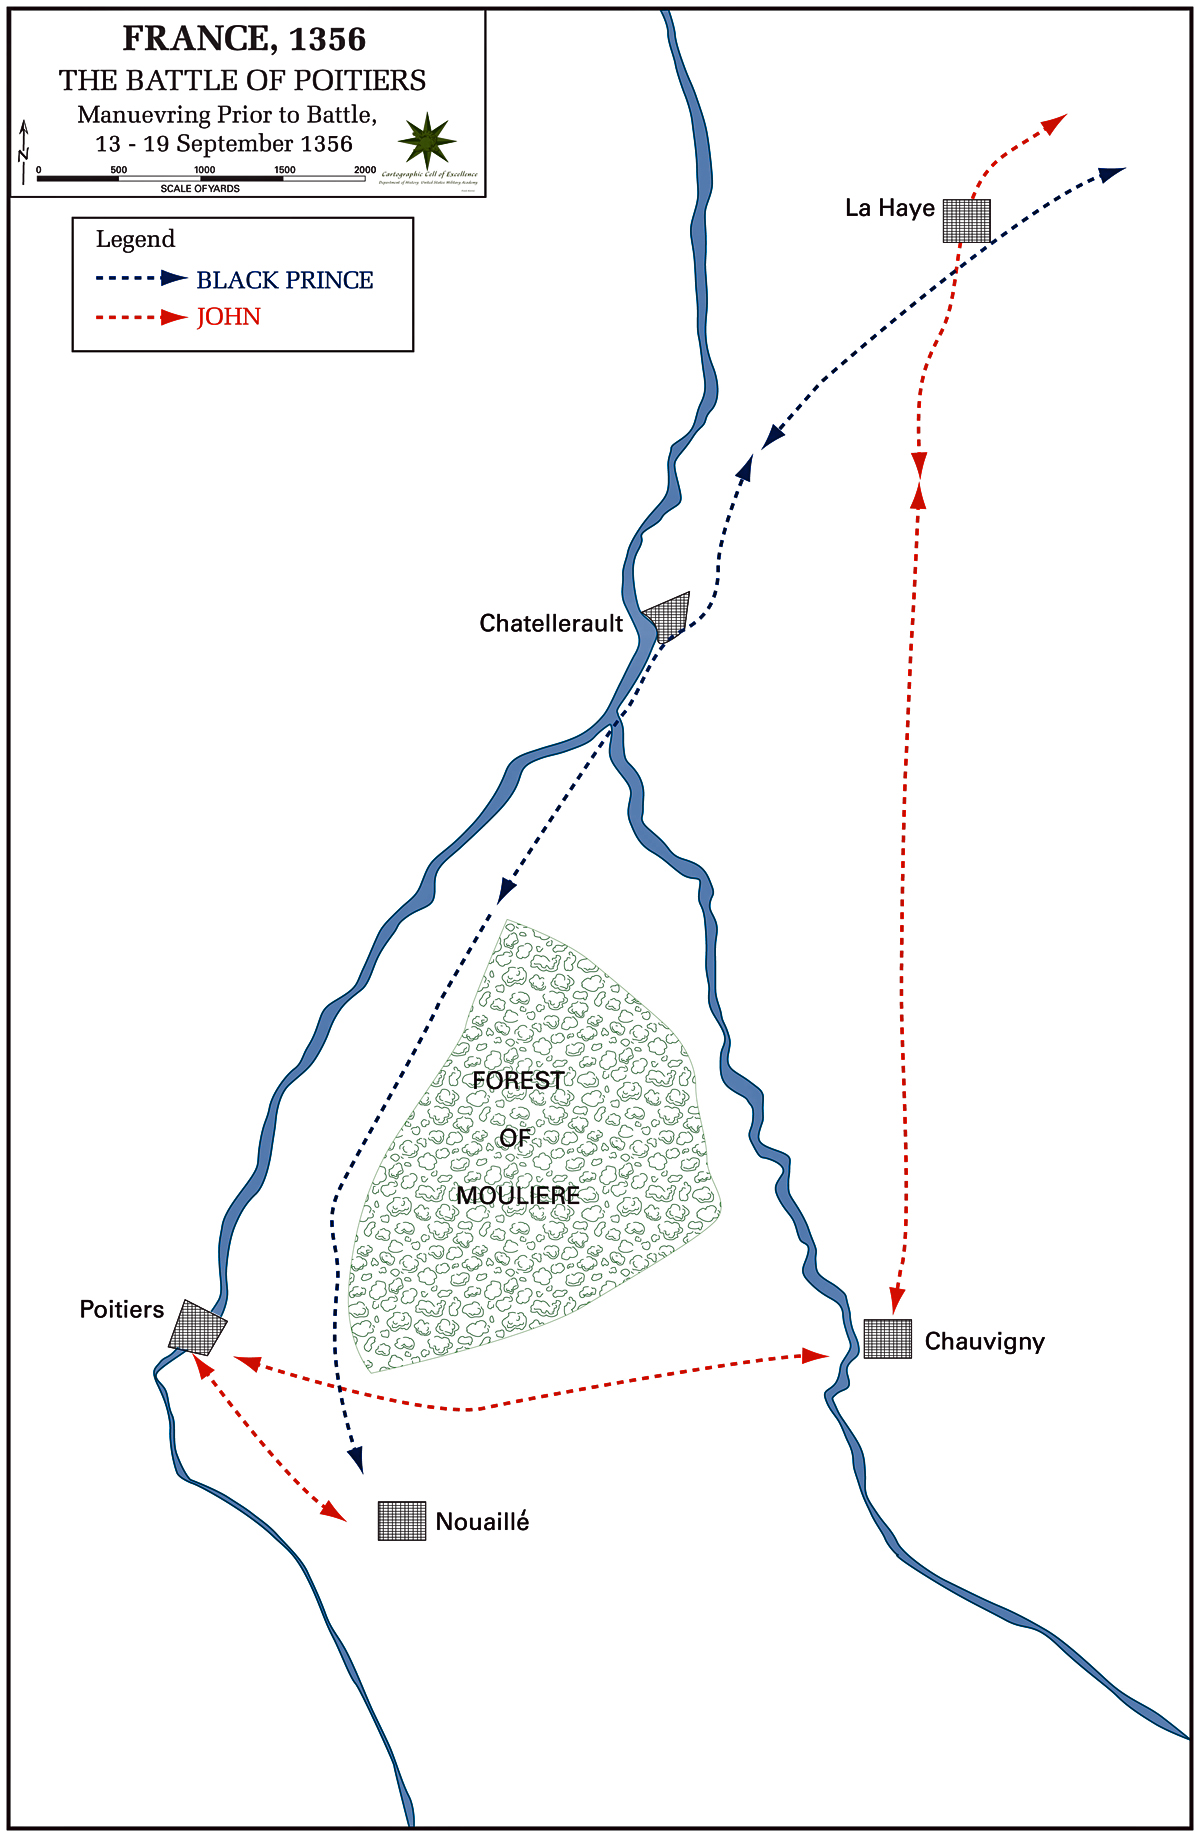 Map of the Battle of Poitiers 1356: Positioning